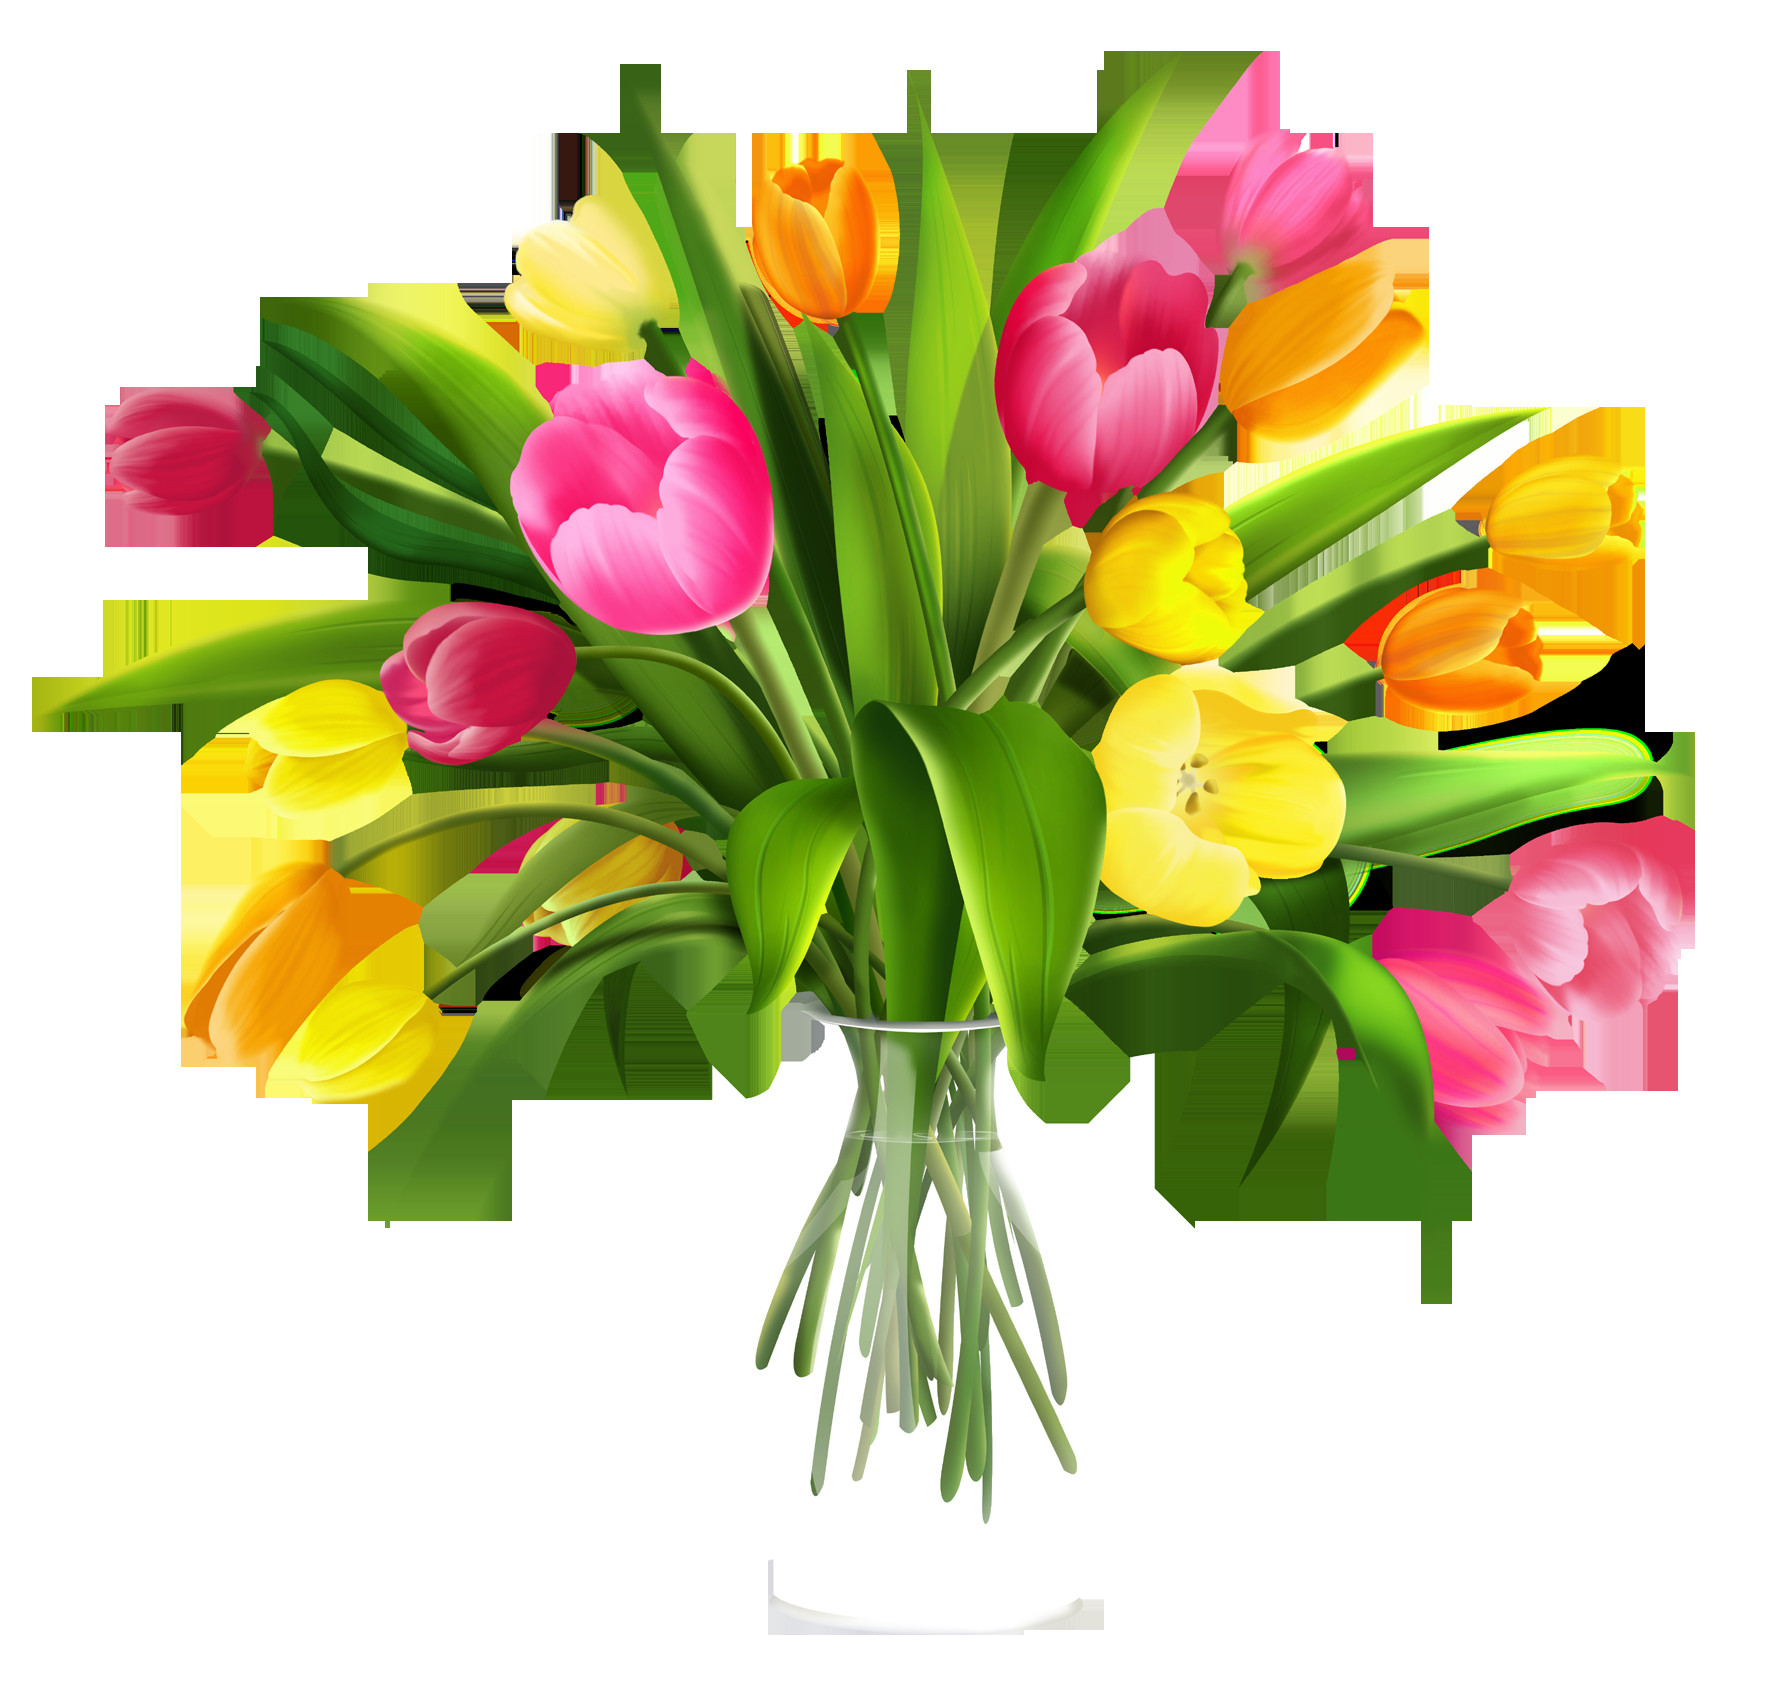 22 Spectacular Flowers with Free Delivery and Free Vase 2024 free download flowers with free delivery and free vase of free clip art flowers in vase use these free images for your in free clip art flowers in vase use these free images for your websites art